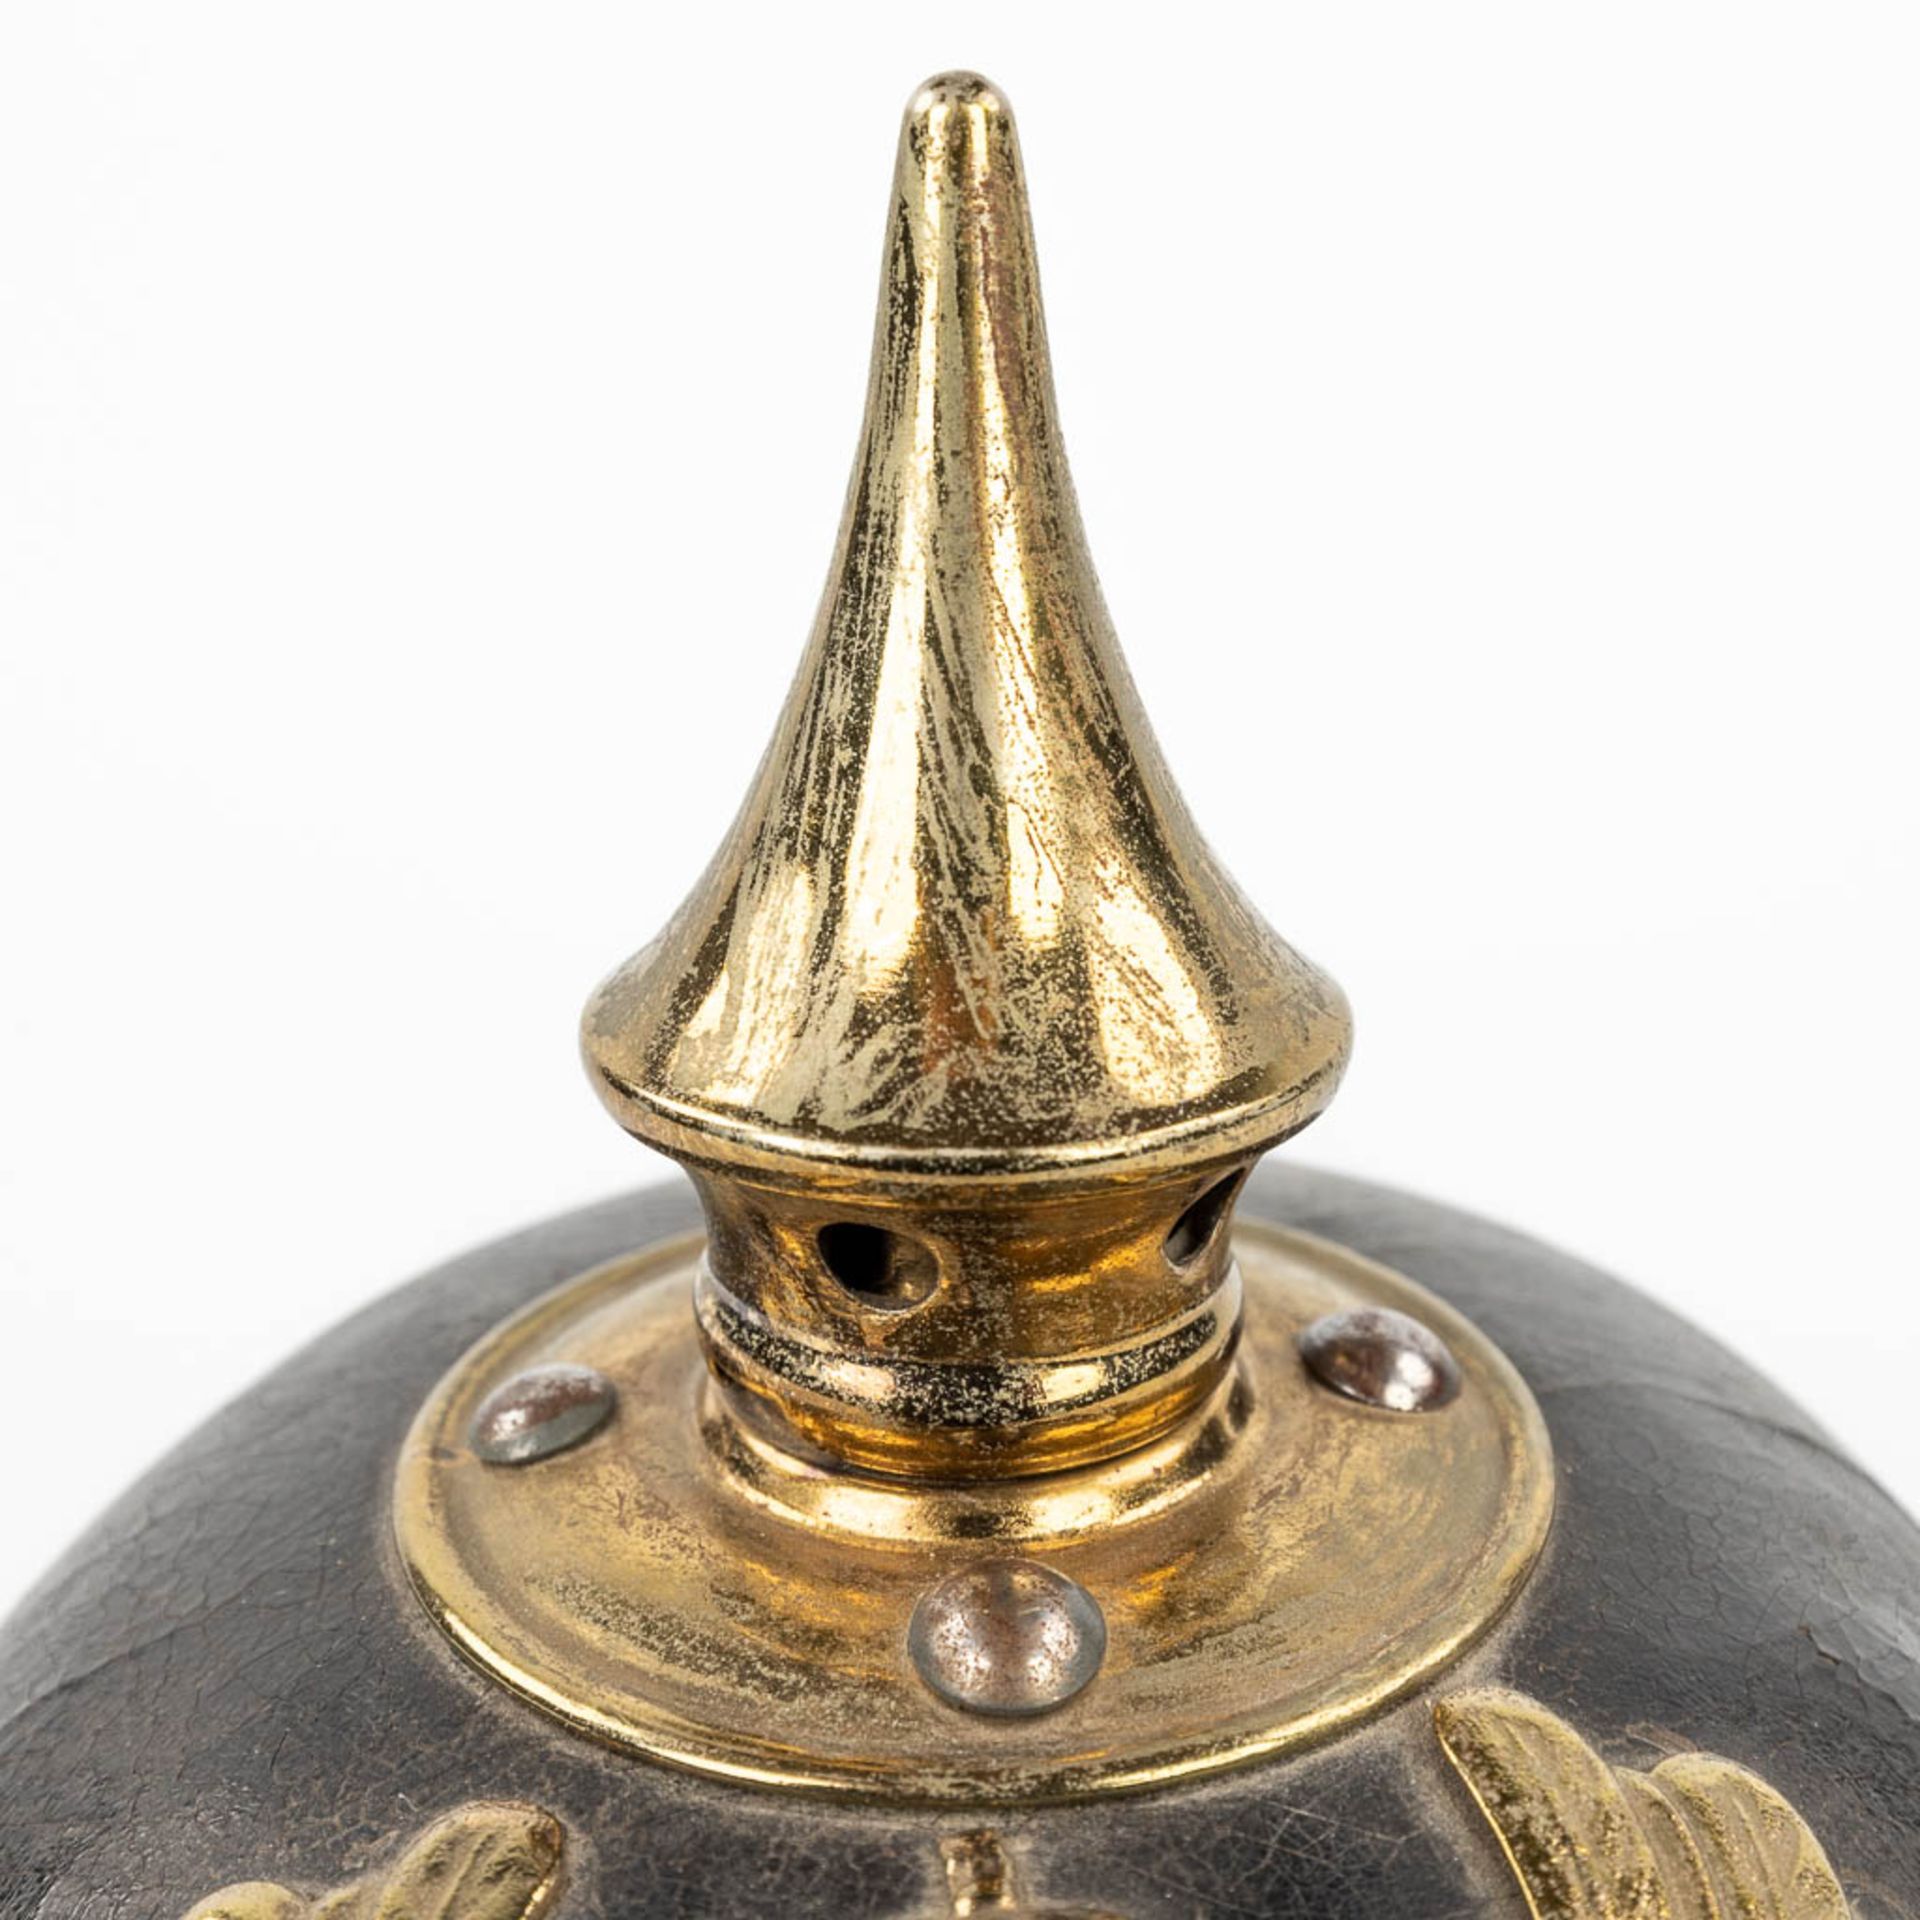 An antique German 'Pickelhaube' decorated with an eagle. Dating 1914-1918. (L:25 x W:18 x H:21 cm) - Bild 13 aus 17